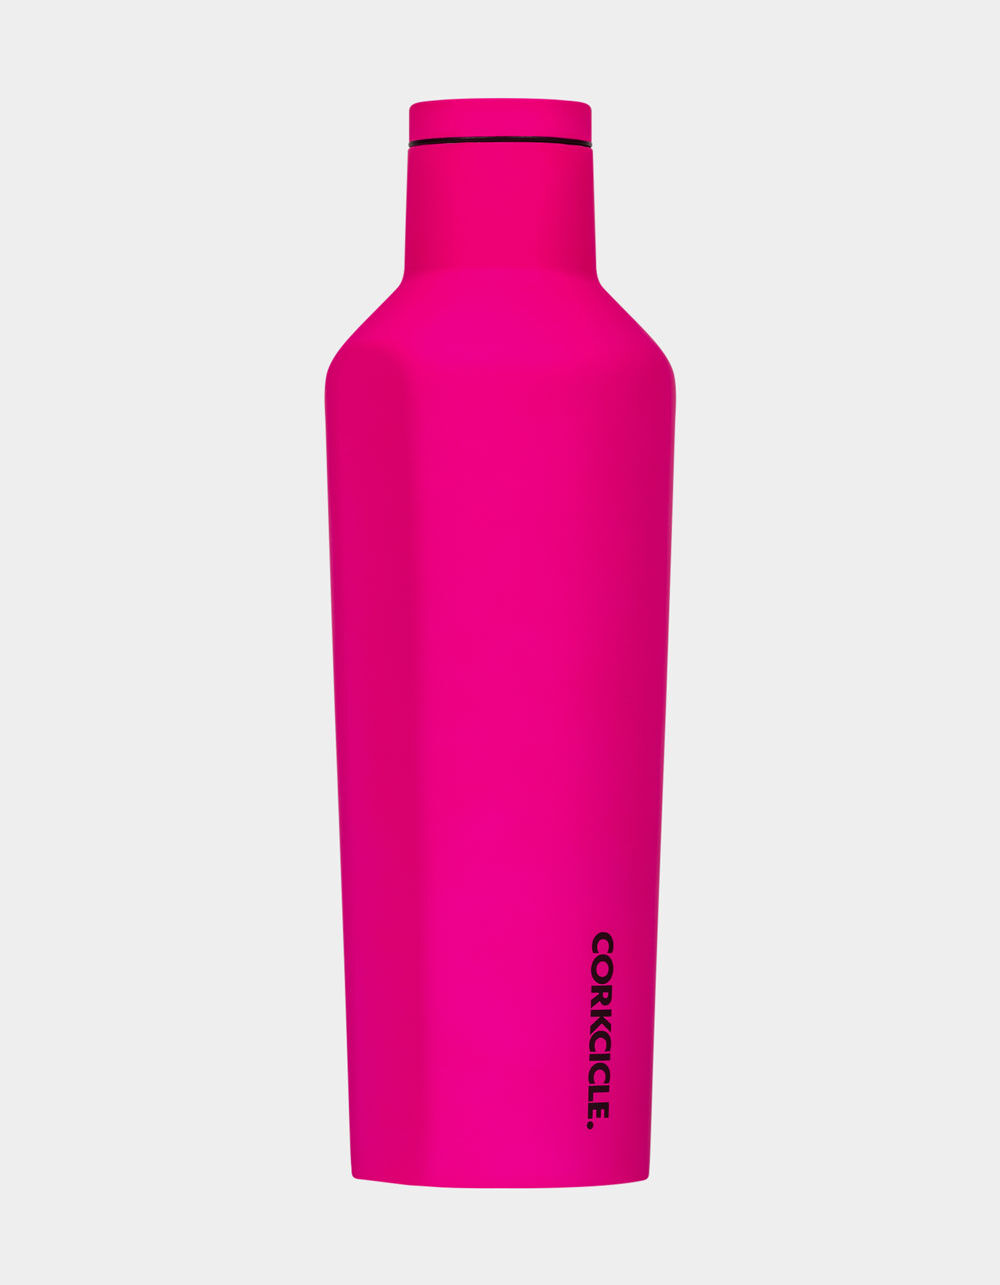 Corkcicle Canteen Neon Pink 16oz Bottle